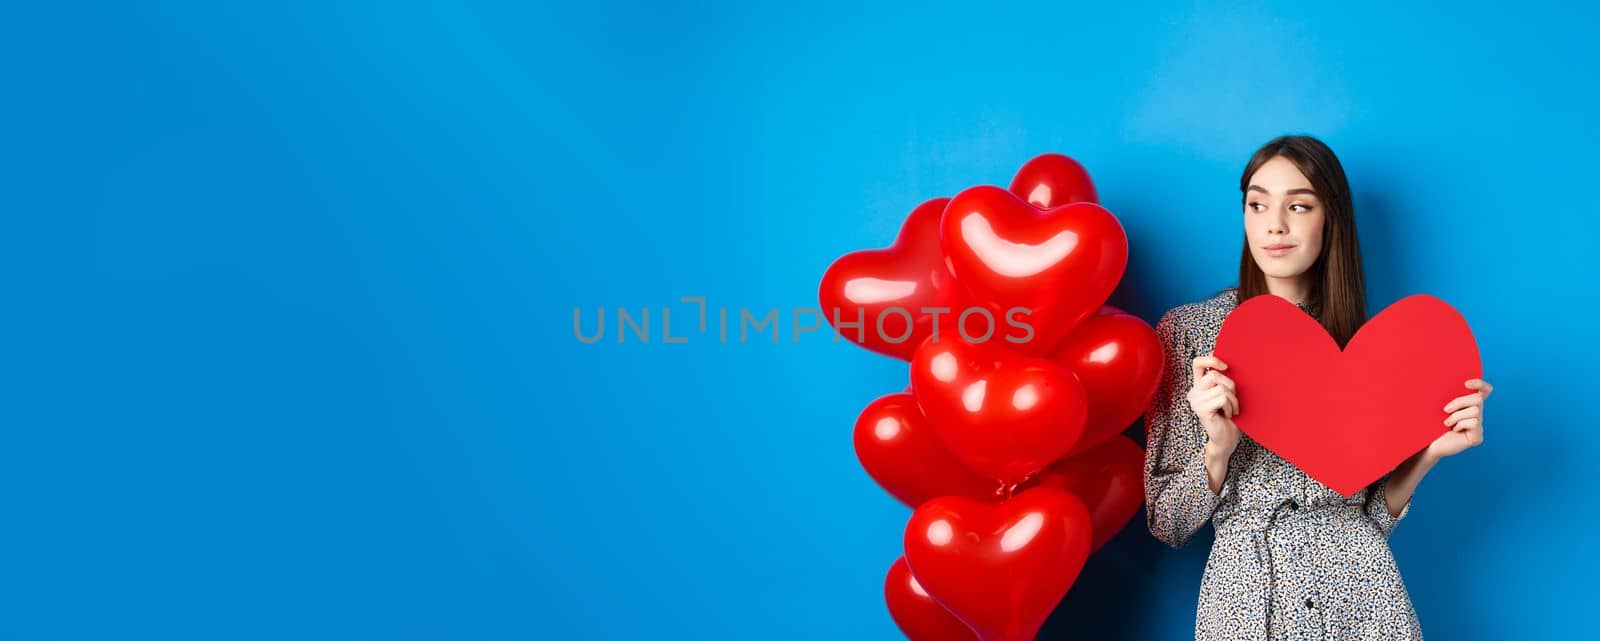 Valentines day. Romantic girl in dress standing near balloons and holding big red heart cutout, dream of something, standing on blue background.